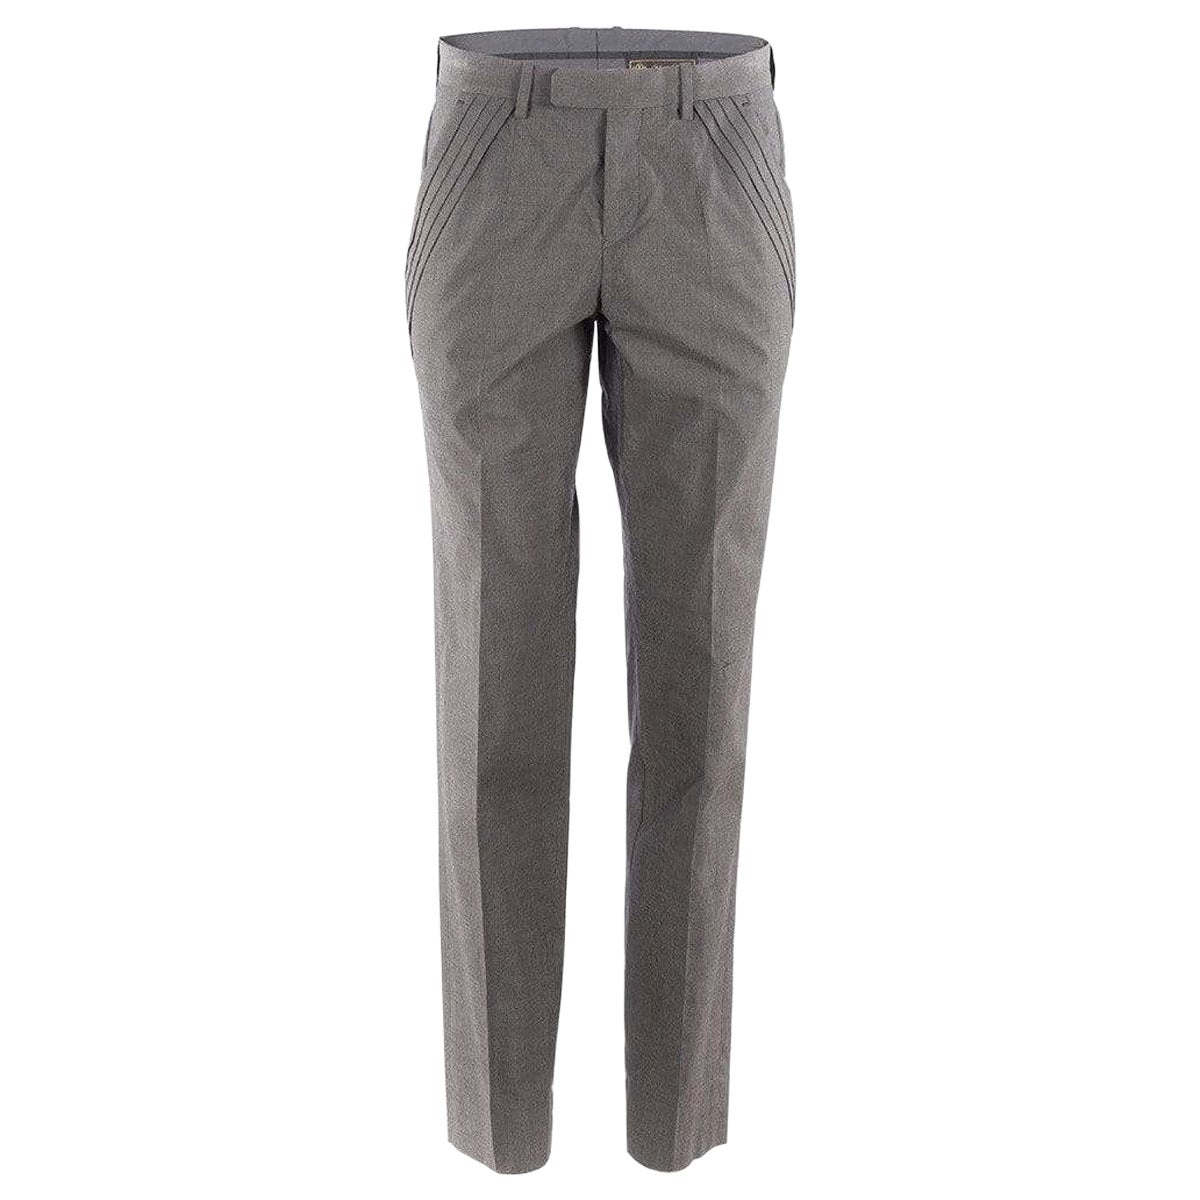 Undercover Grey Pleated Trouser   For Sale